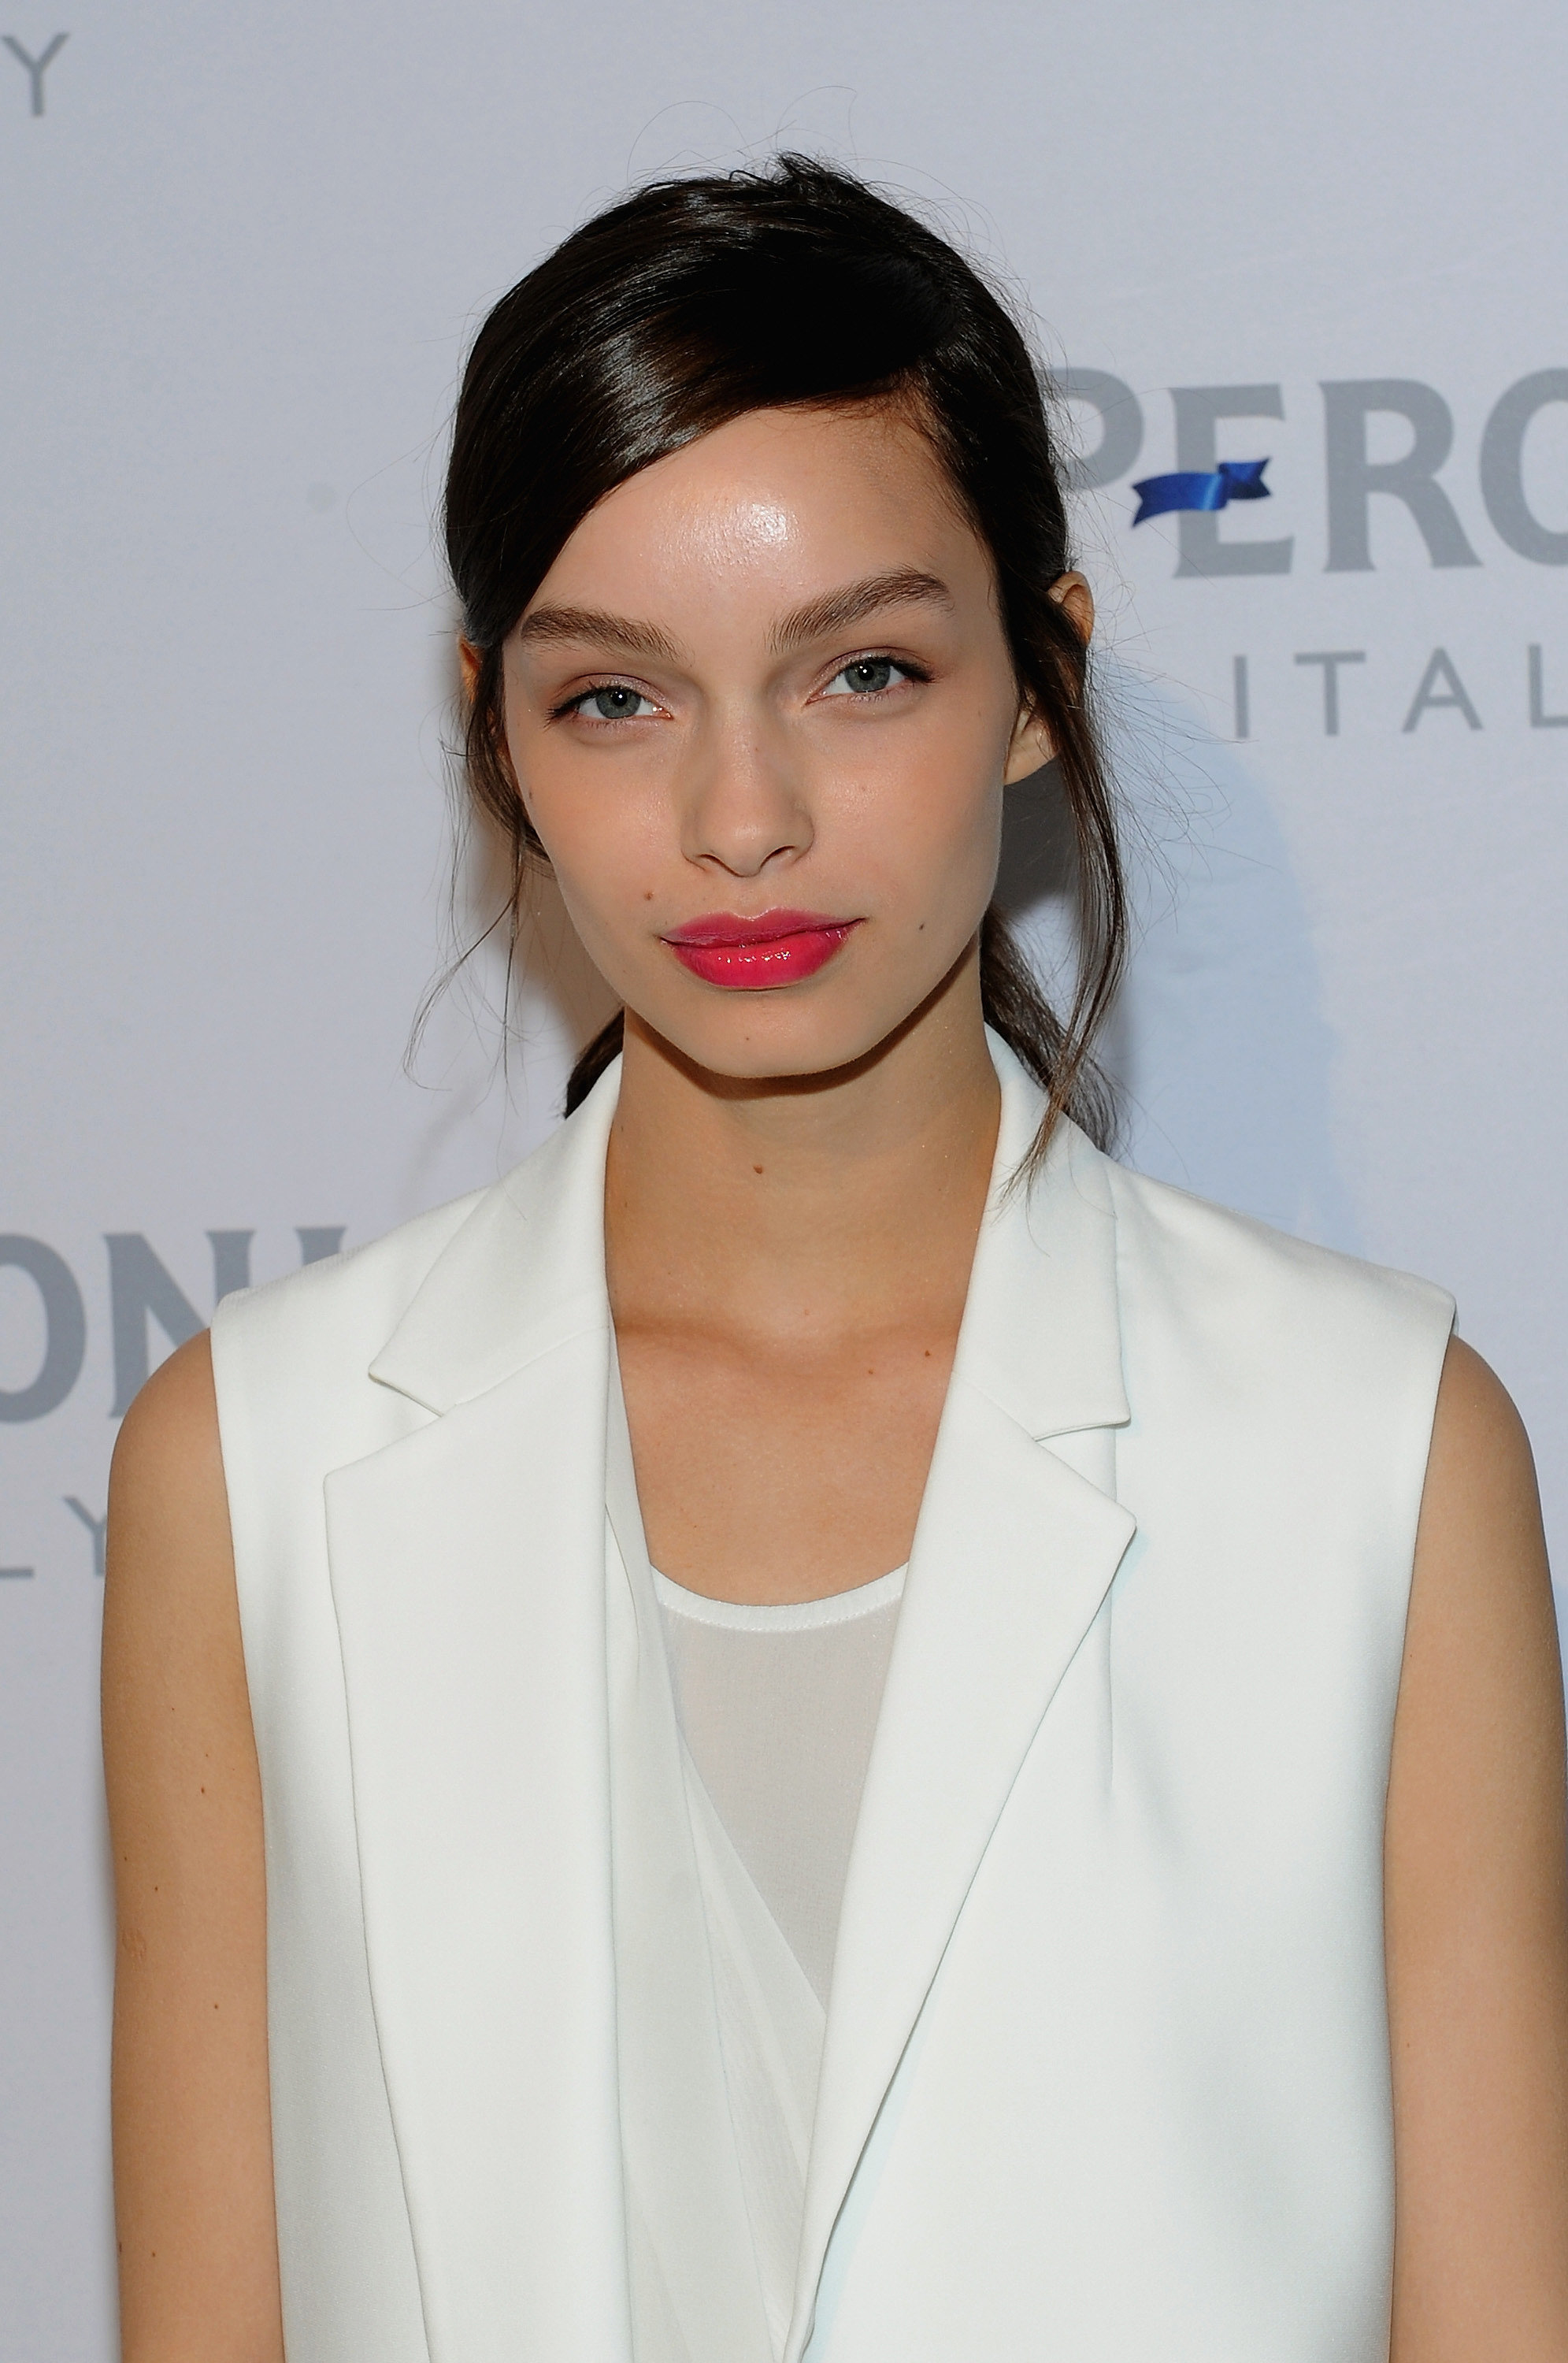 Luma Grothe Berry Lips And Gleaming Skin Were The Winners In This Week S Most Beautiful